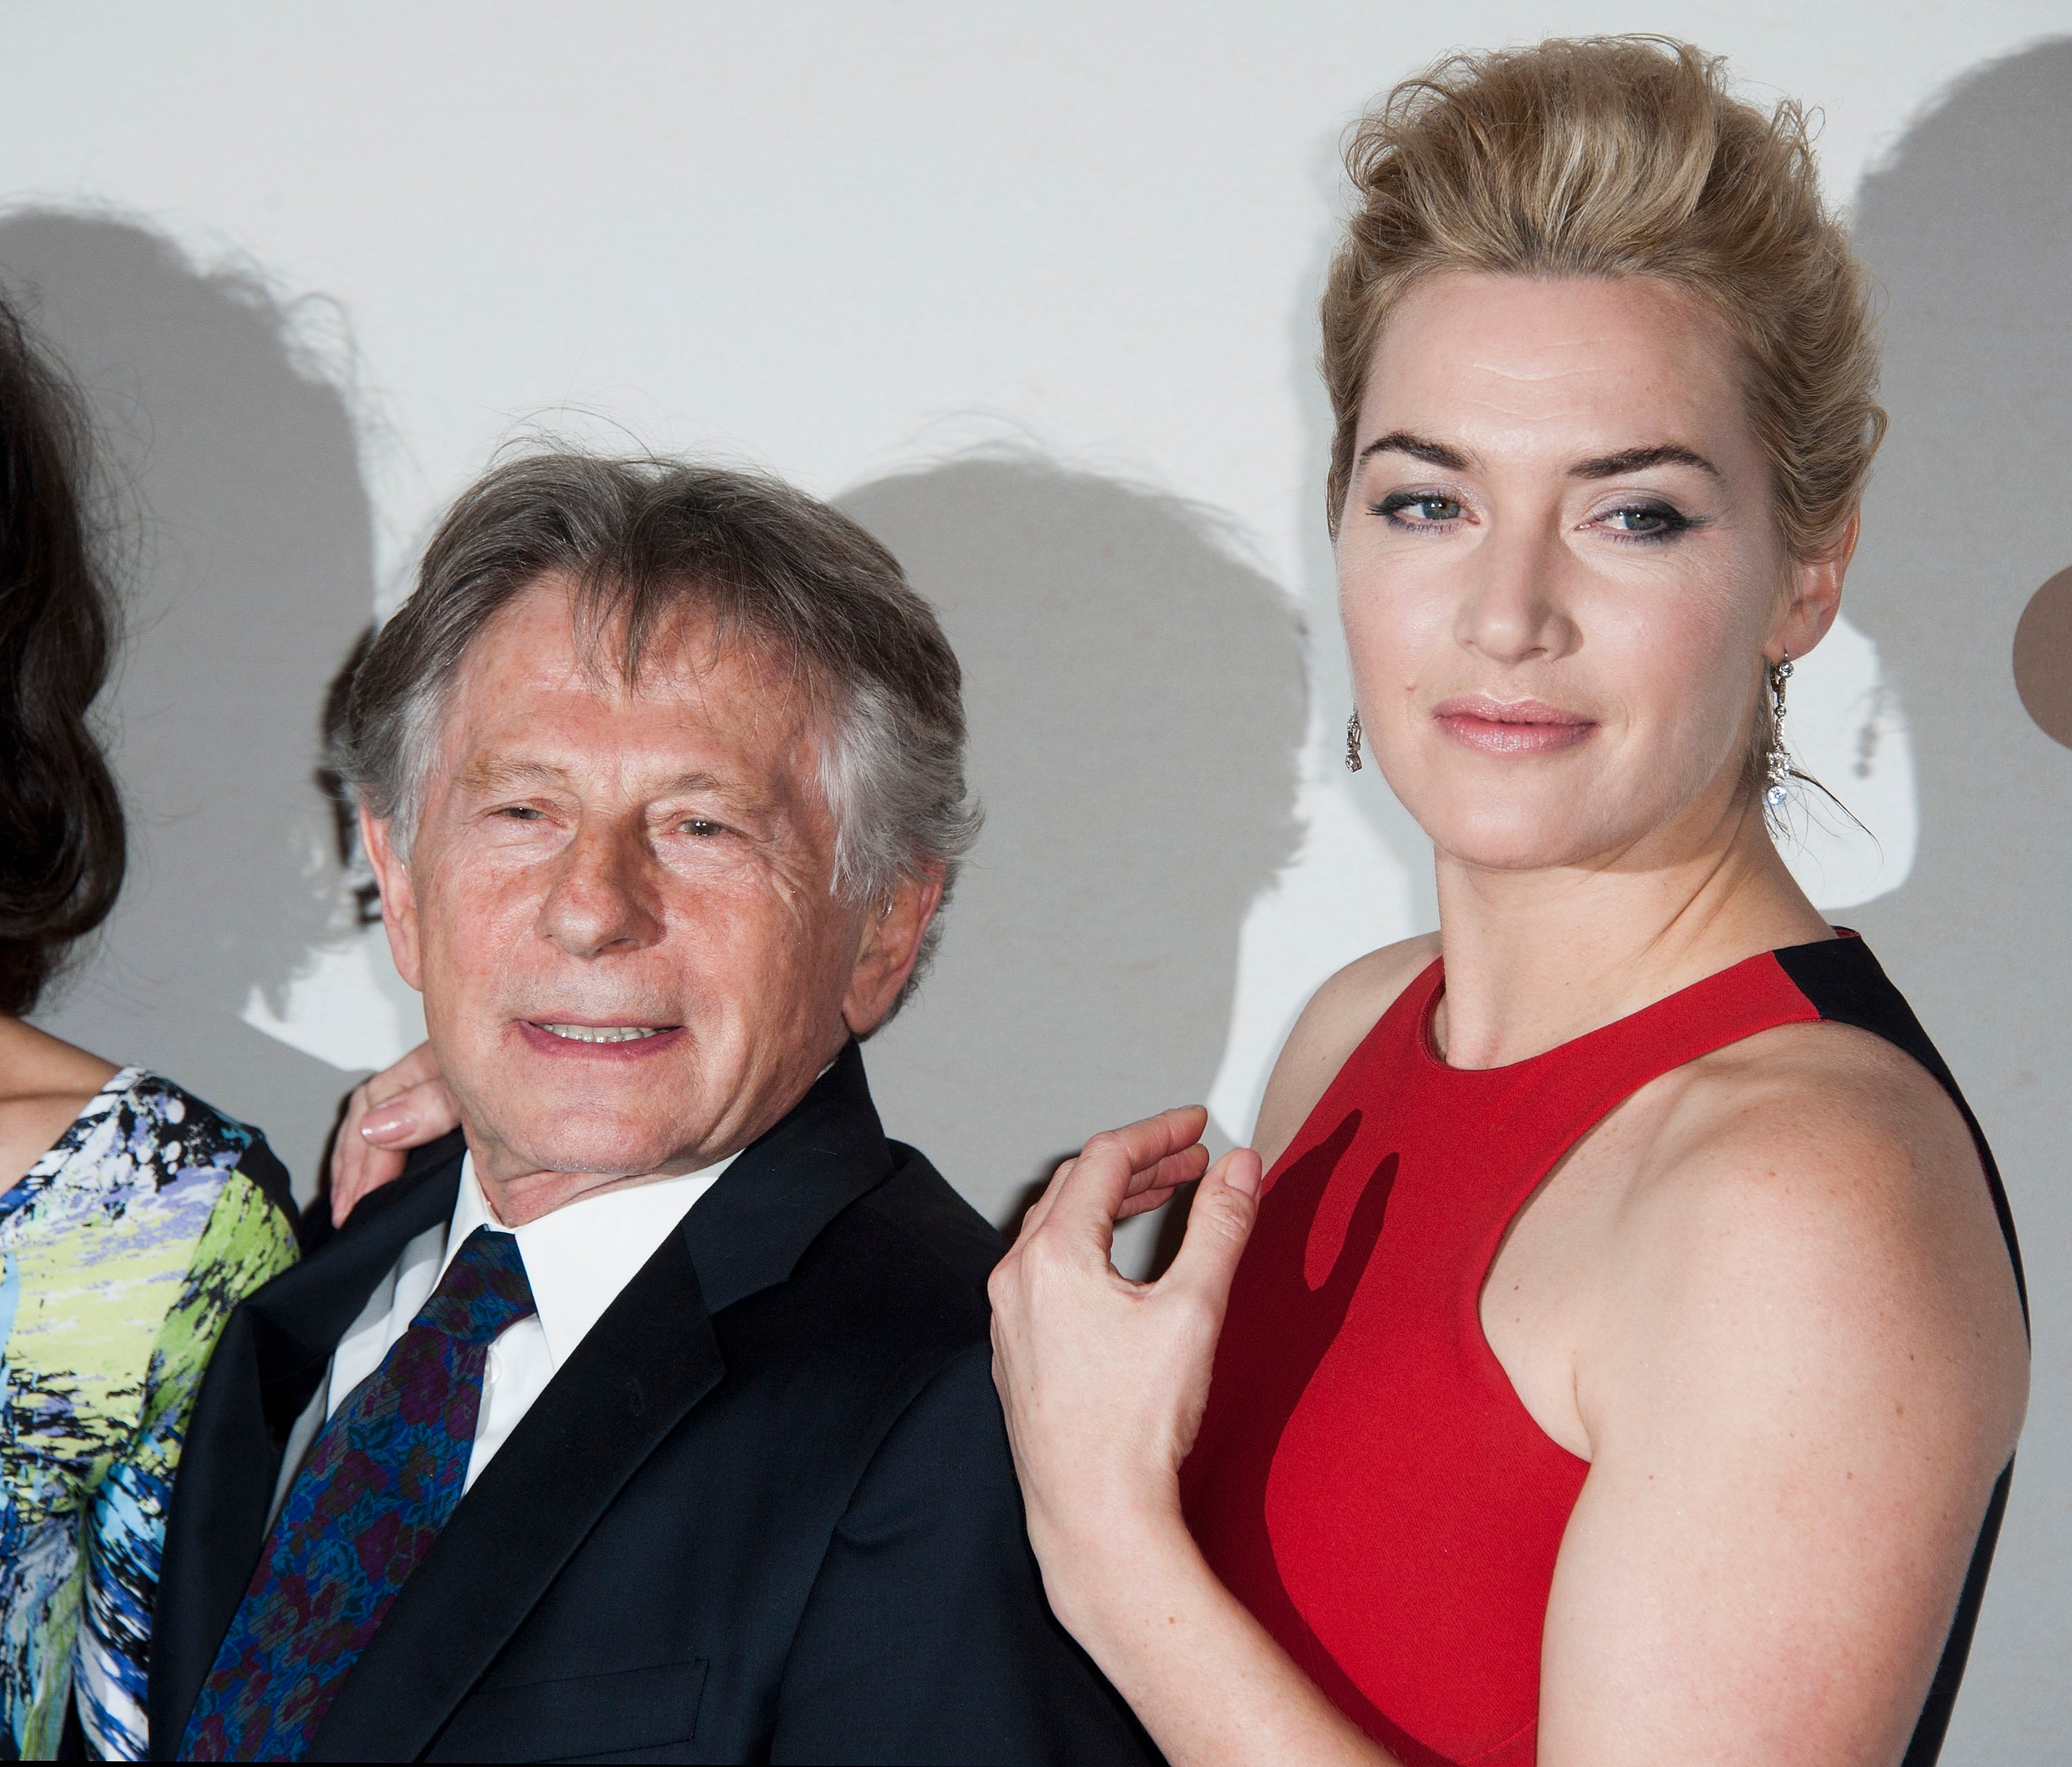 Kate Winslet ‘Regrets’ Working with Roman Polanski and Woody Allen: ‘It’s F*cking Disgraceful’